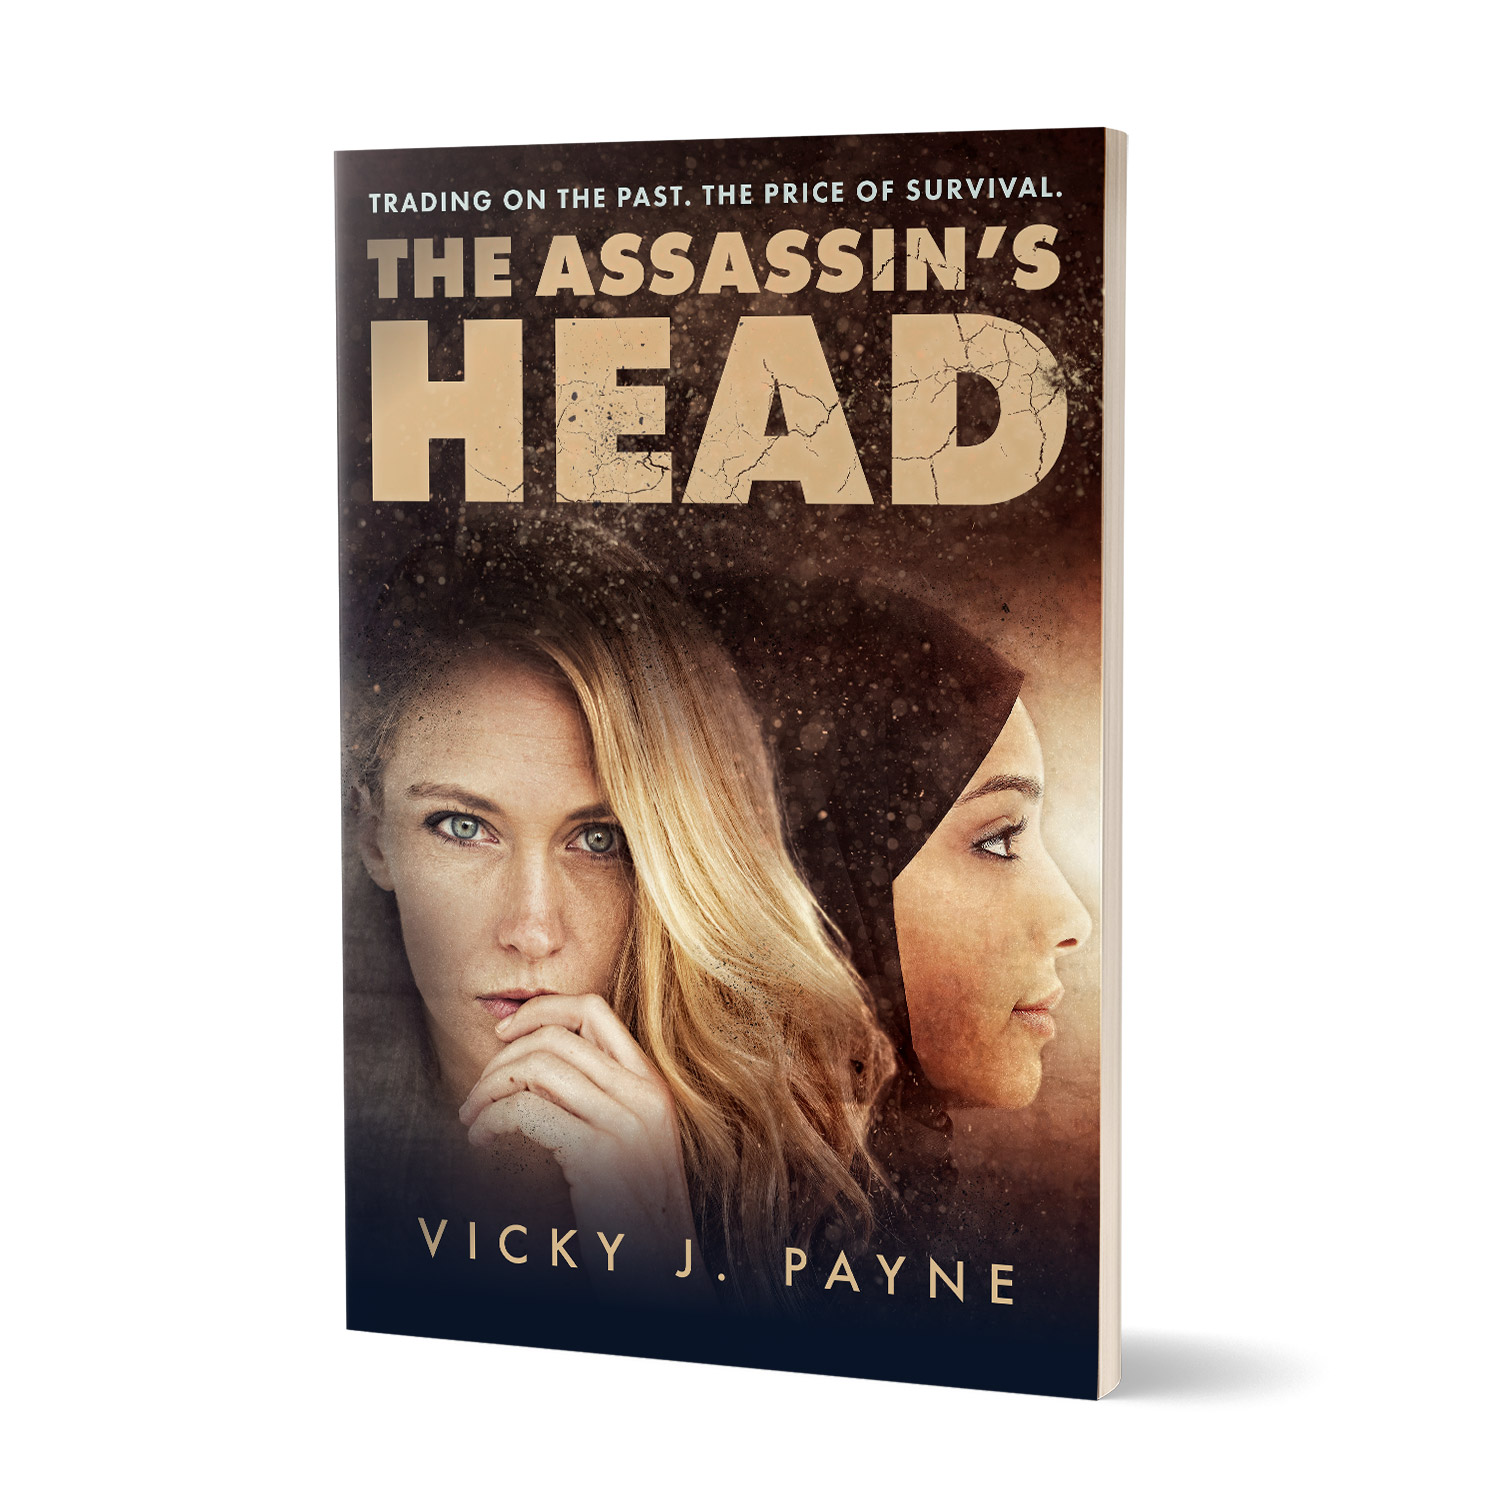 'The Assassin's Head' is a terrific female-led thriller, set in the aftermath of the 2003 Iraq War. The author is Vicky J. Ward. The book cover design and interior formatting are by Mark Thomas. To learn more about what Mark could do for your book, please visit coverness.com.